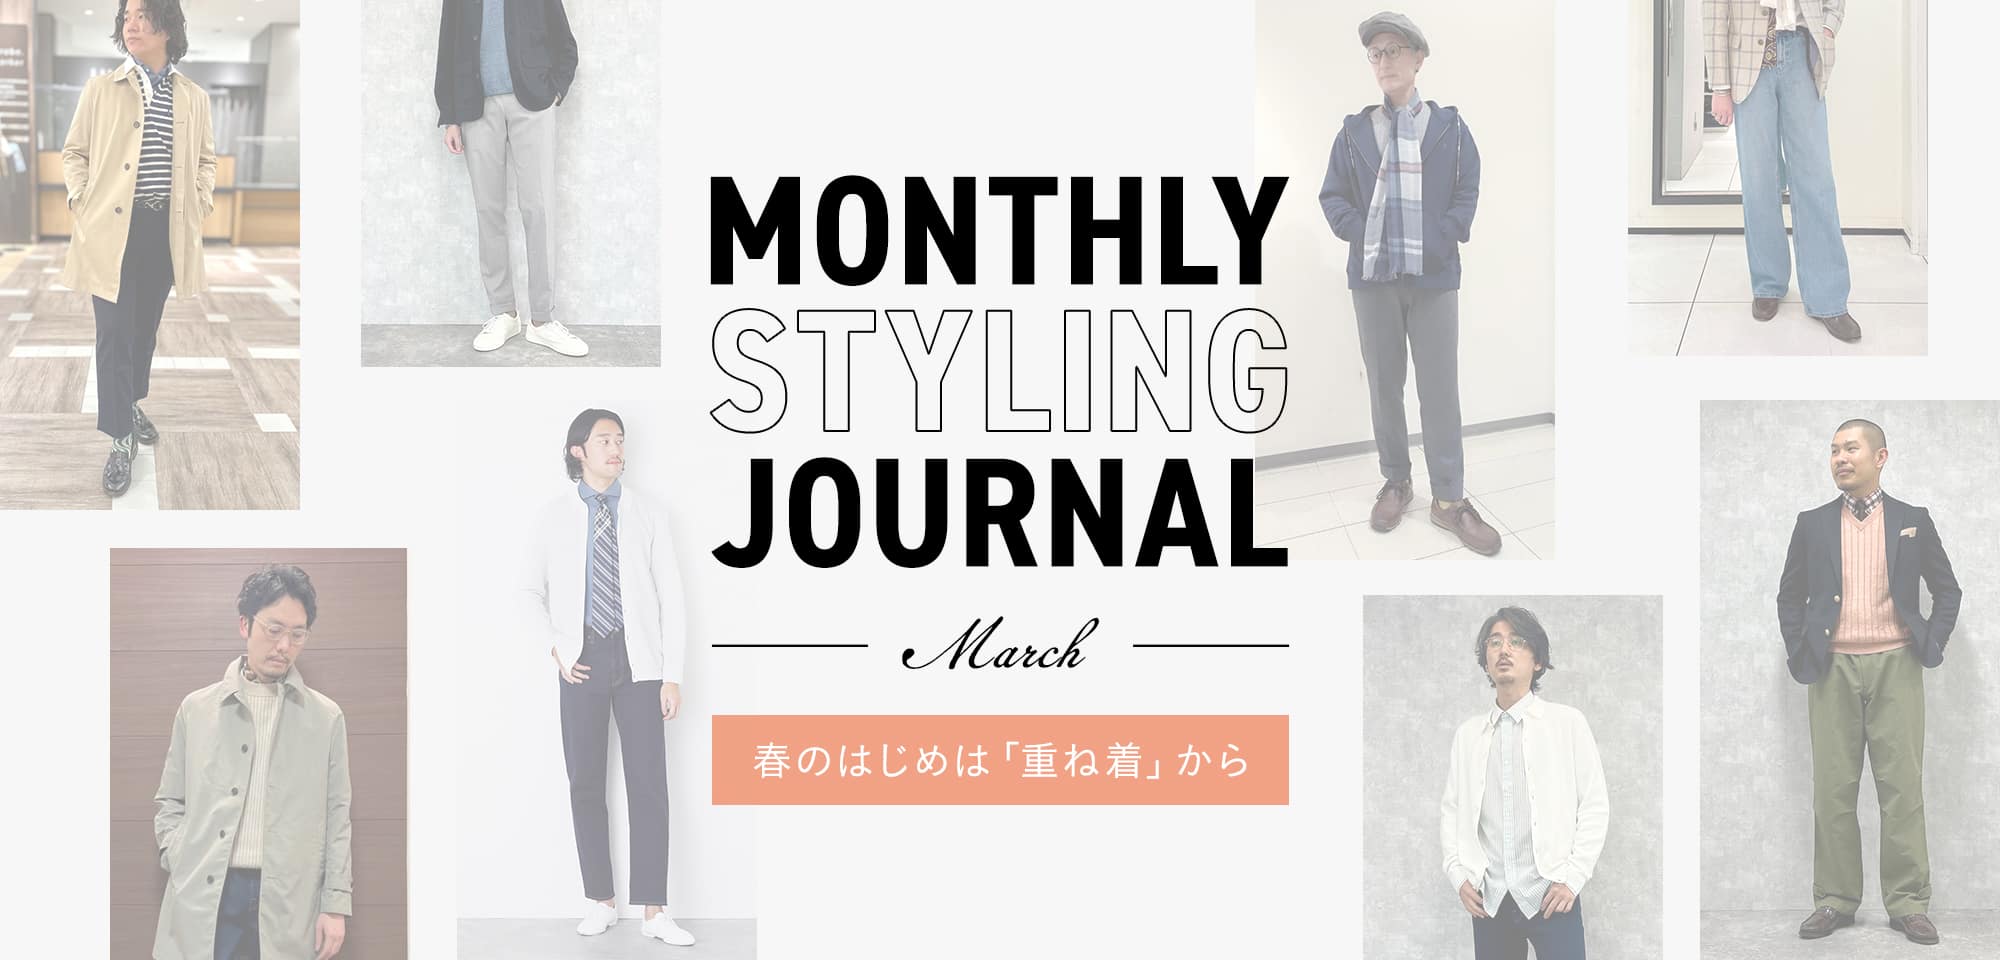 MEN_Monthly Styling Journal3